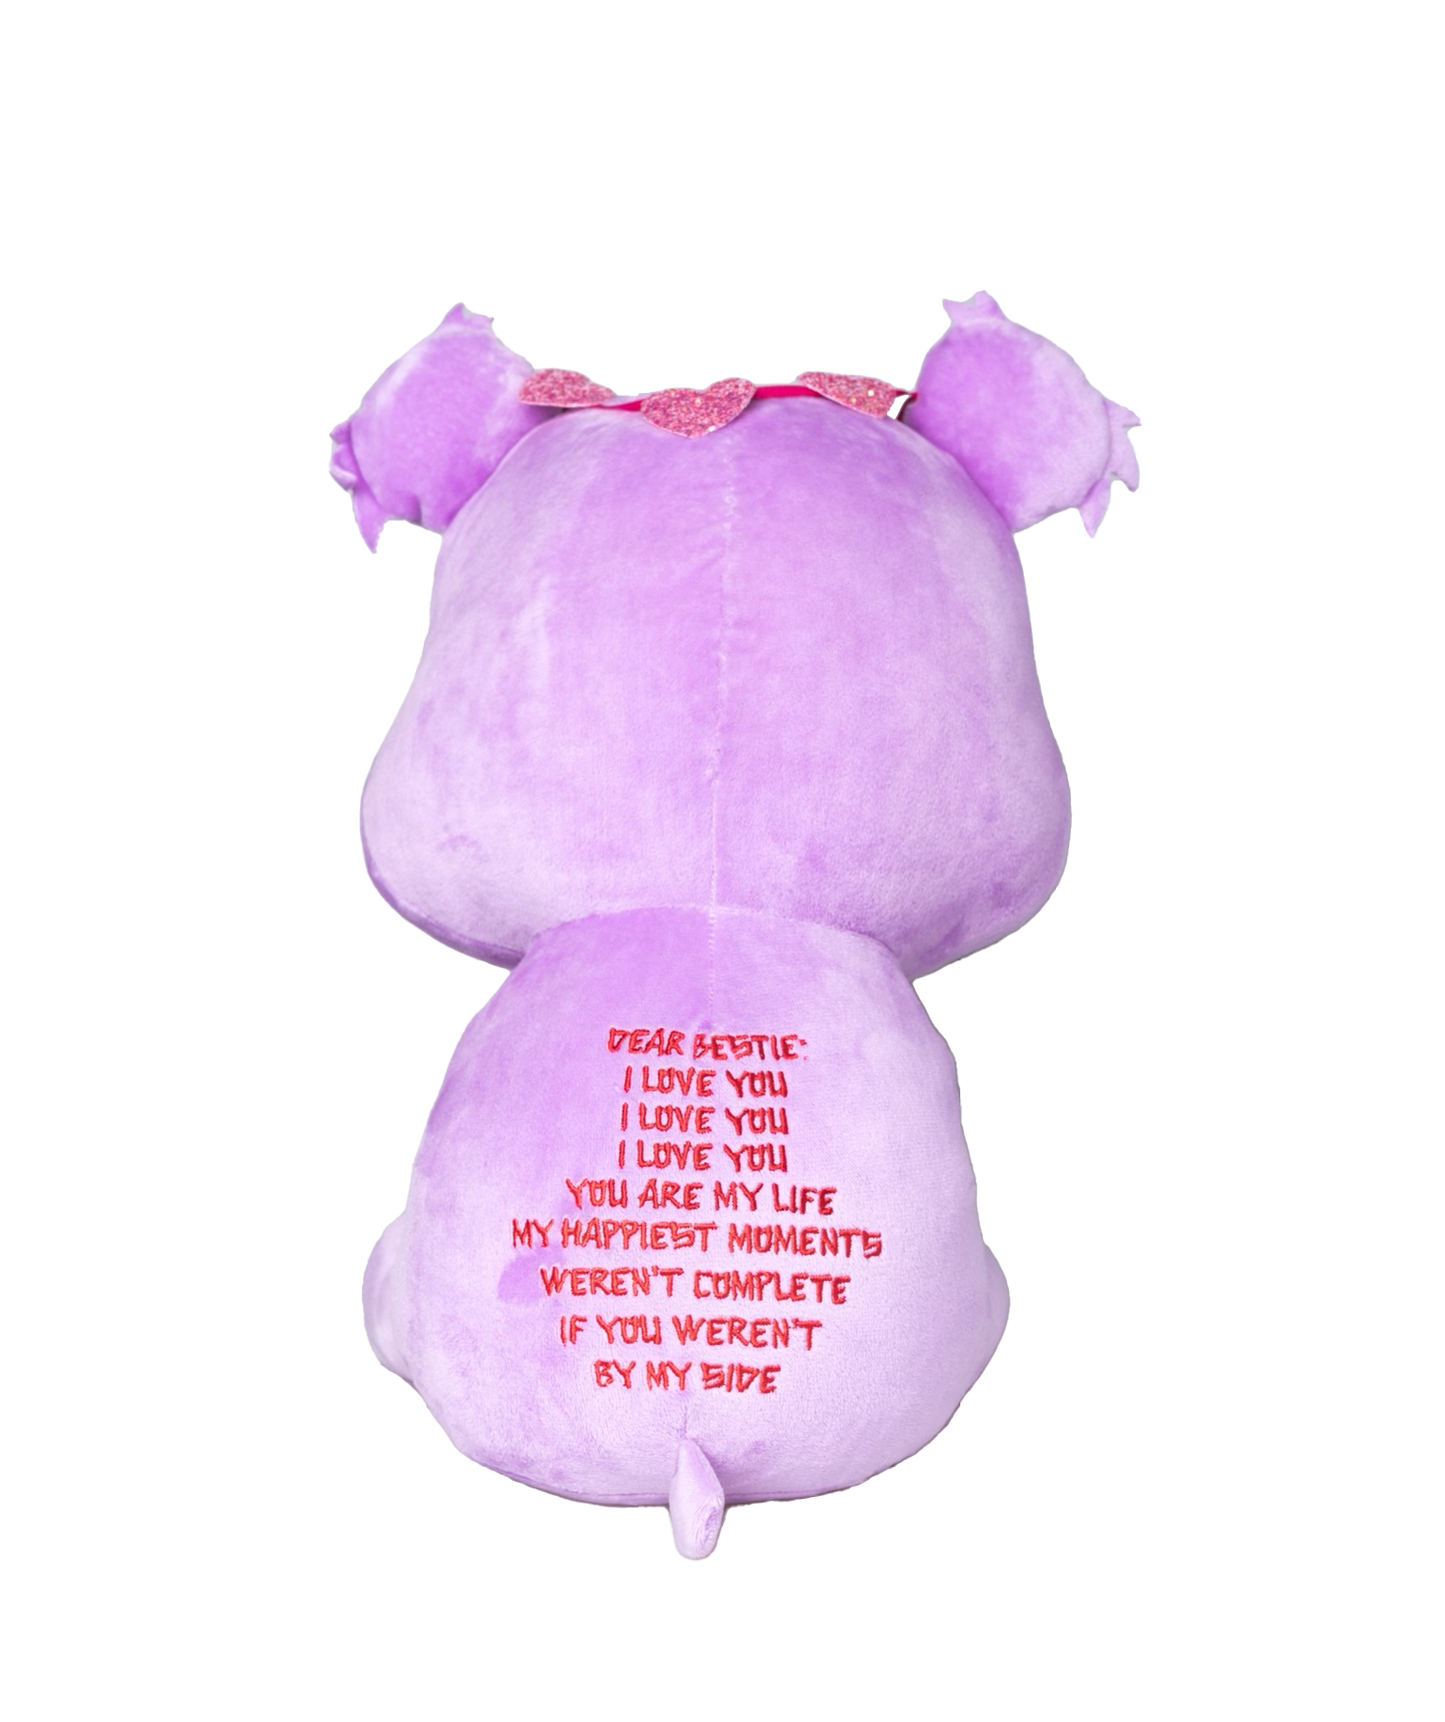 14" Romeo Your Vanilla Scented Emotional Support Friend For Joy